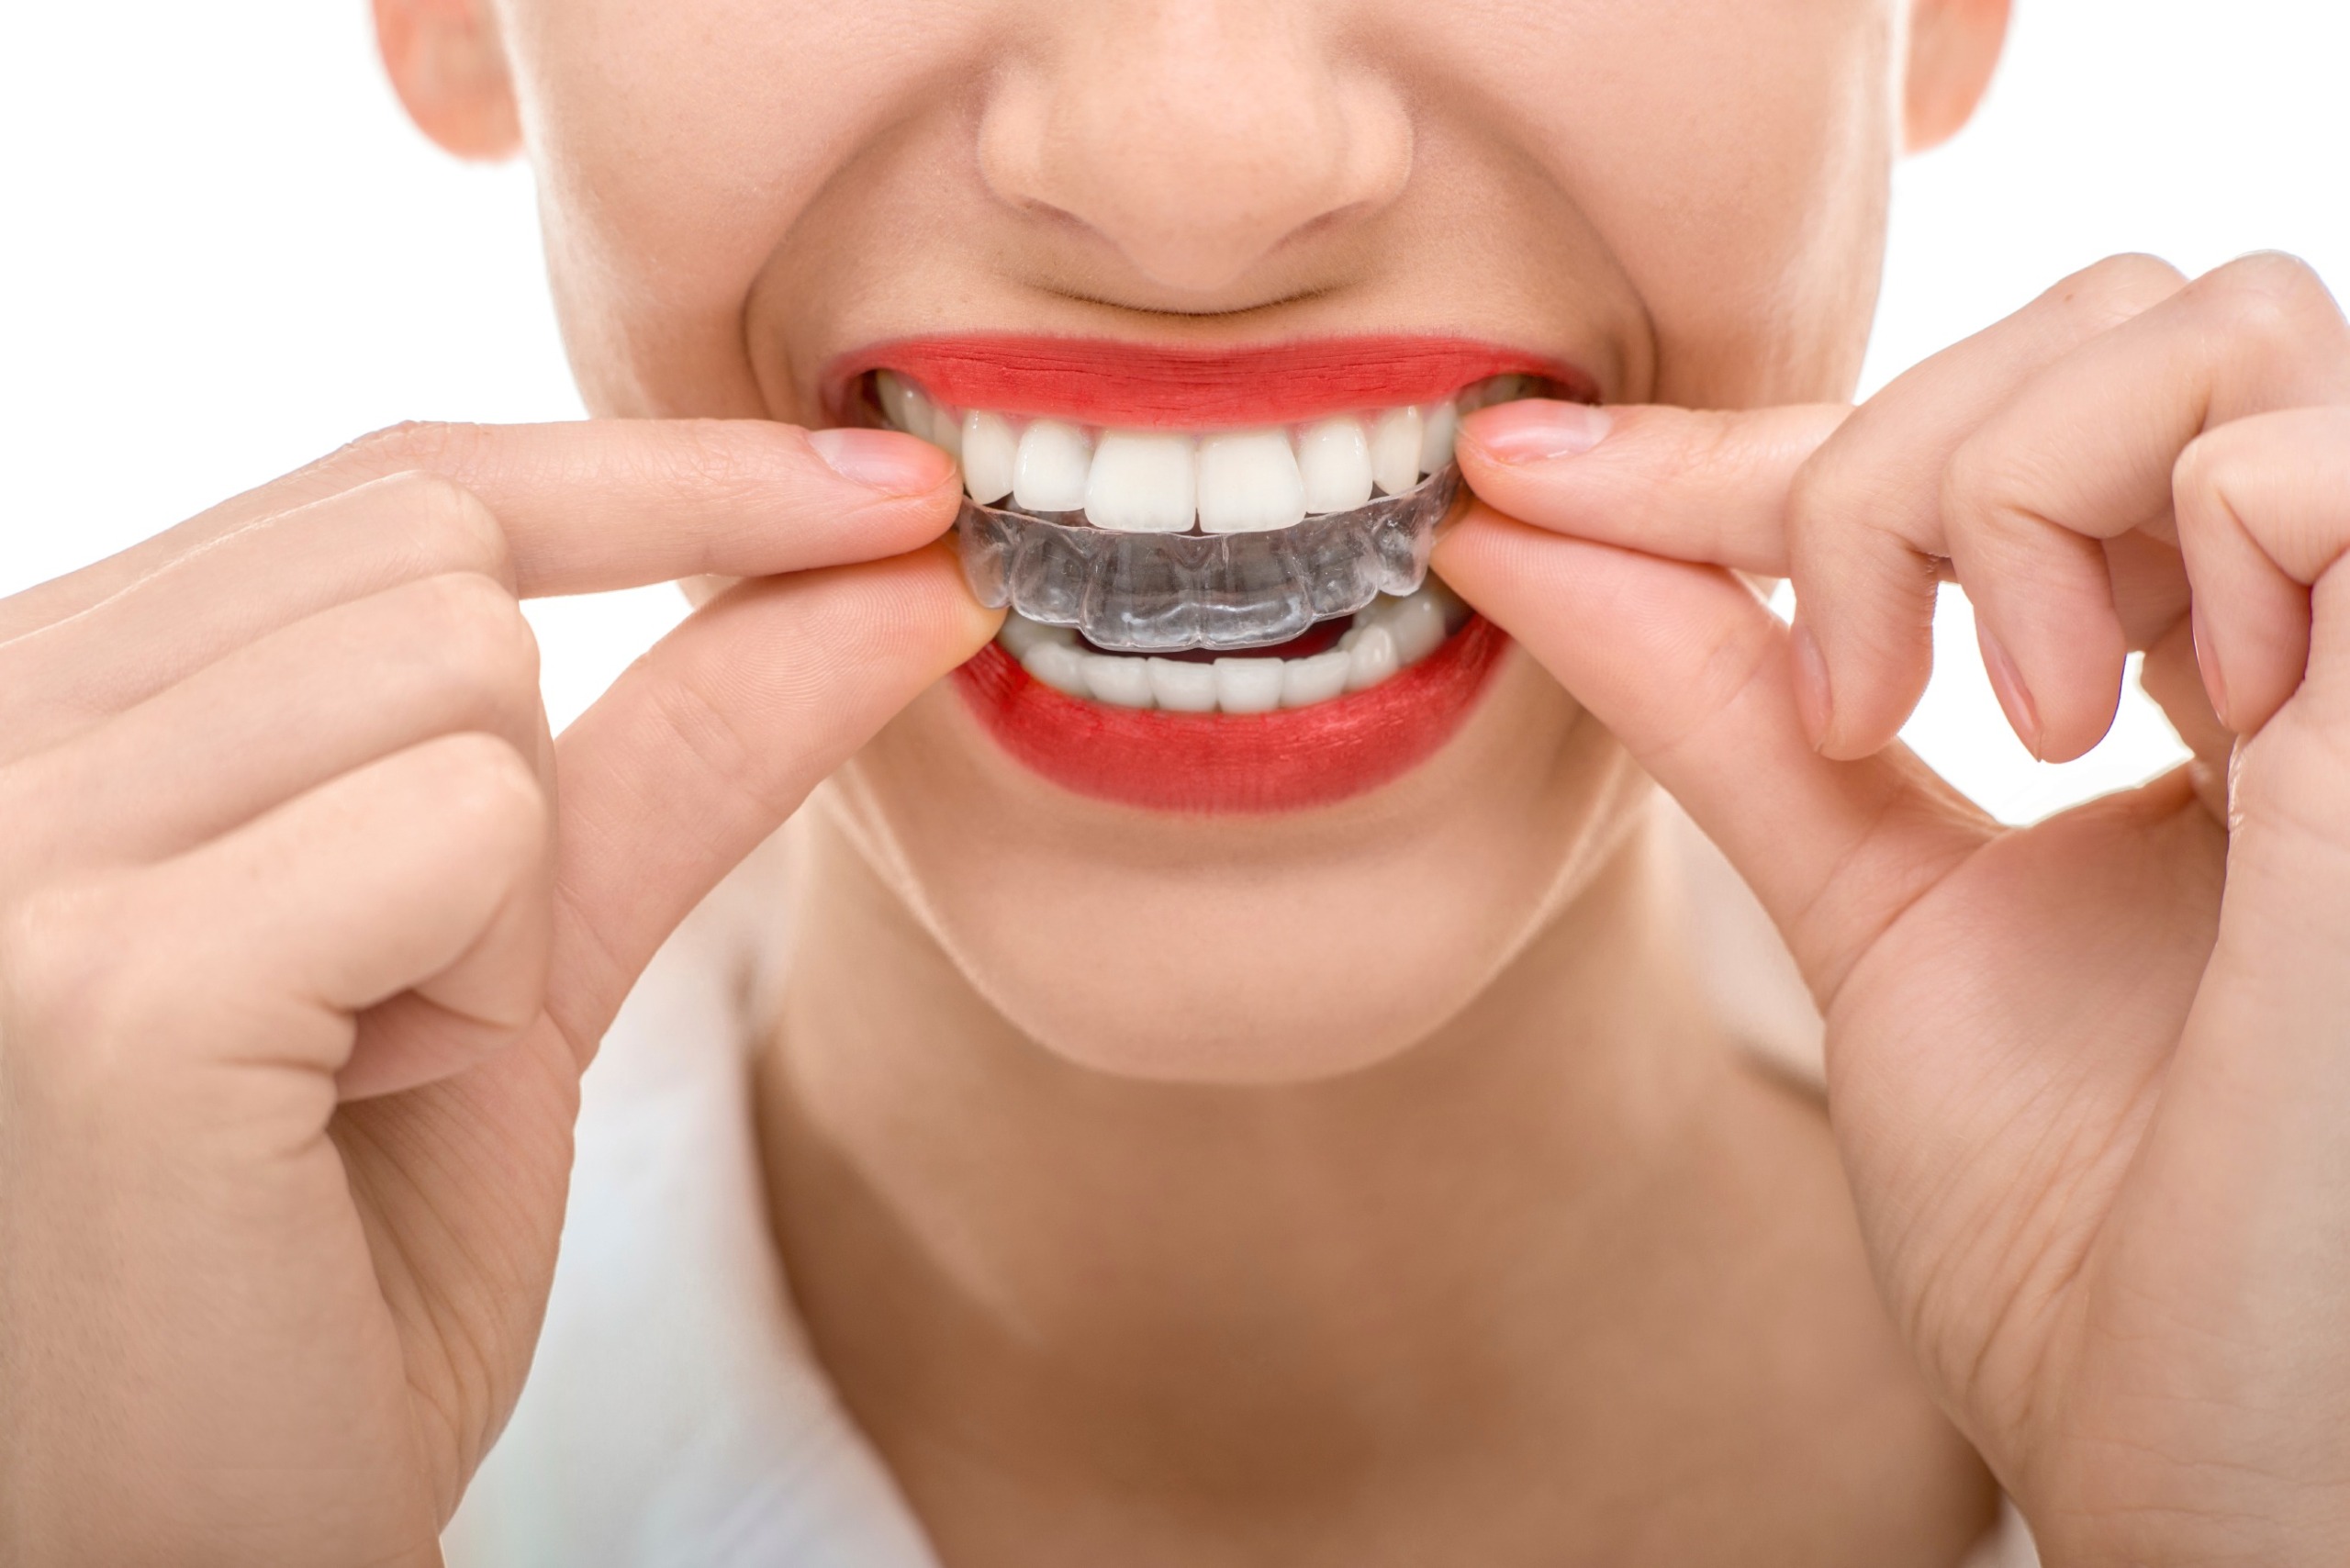 Tips to Make Invisalign Unchallenging